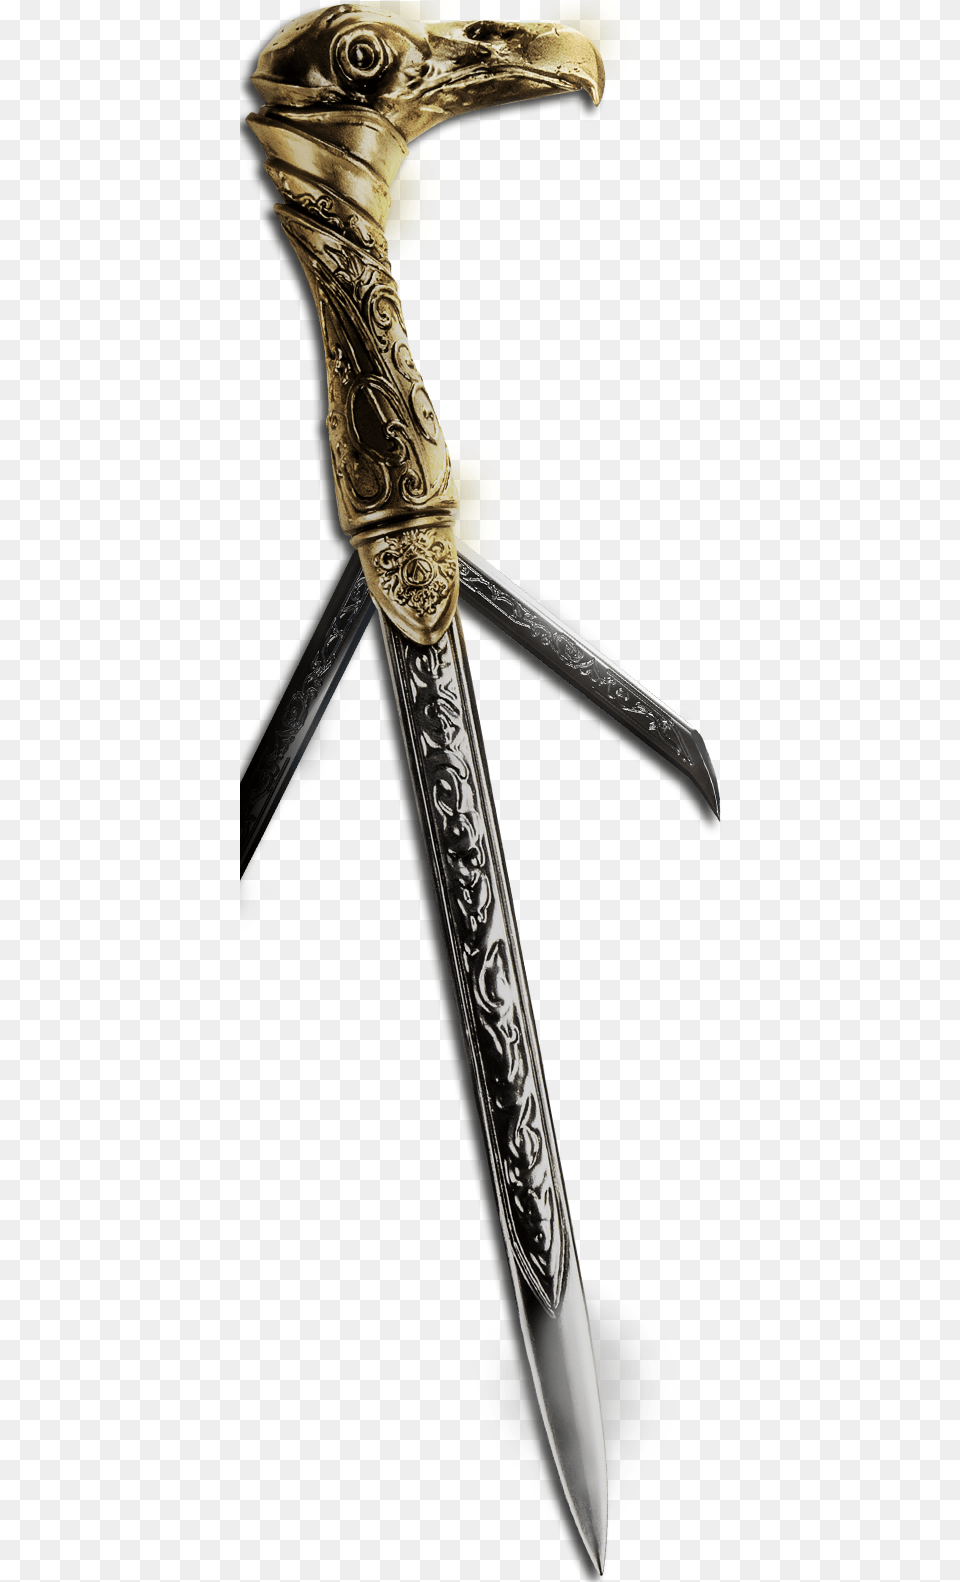 Acs Gl Weapon1 Scabbard, Blade, Dagger, Knife, Sword Png Image